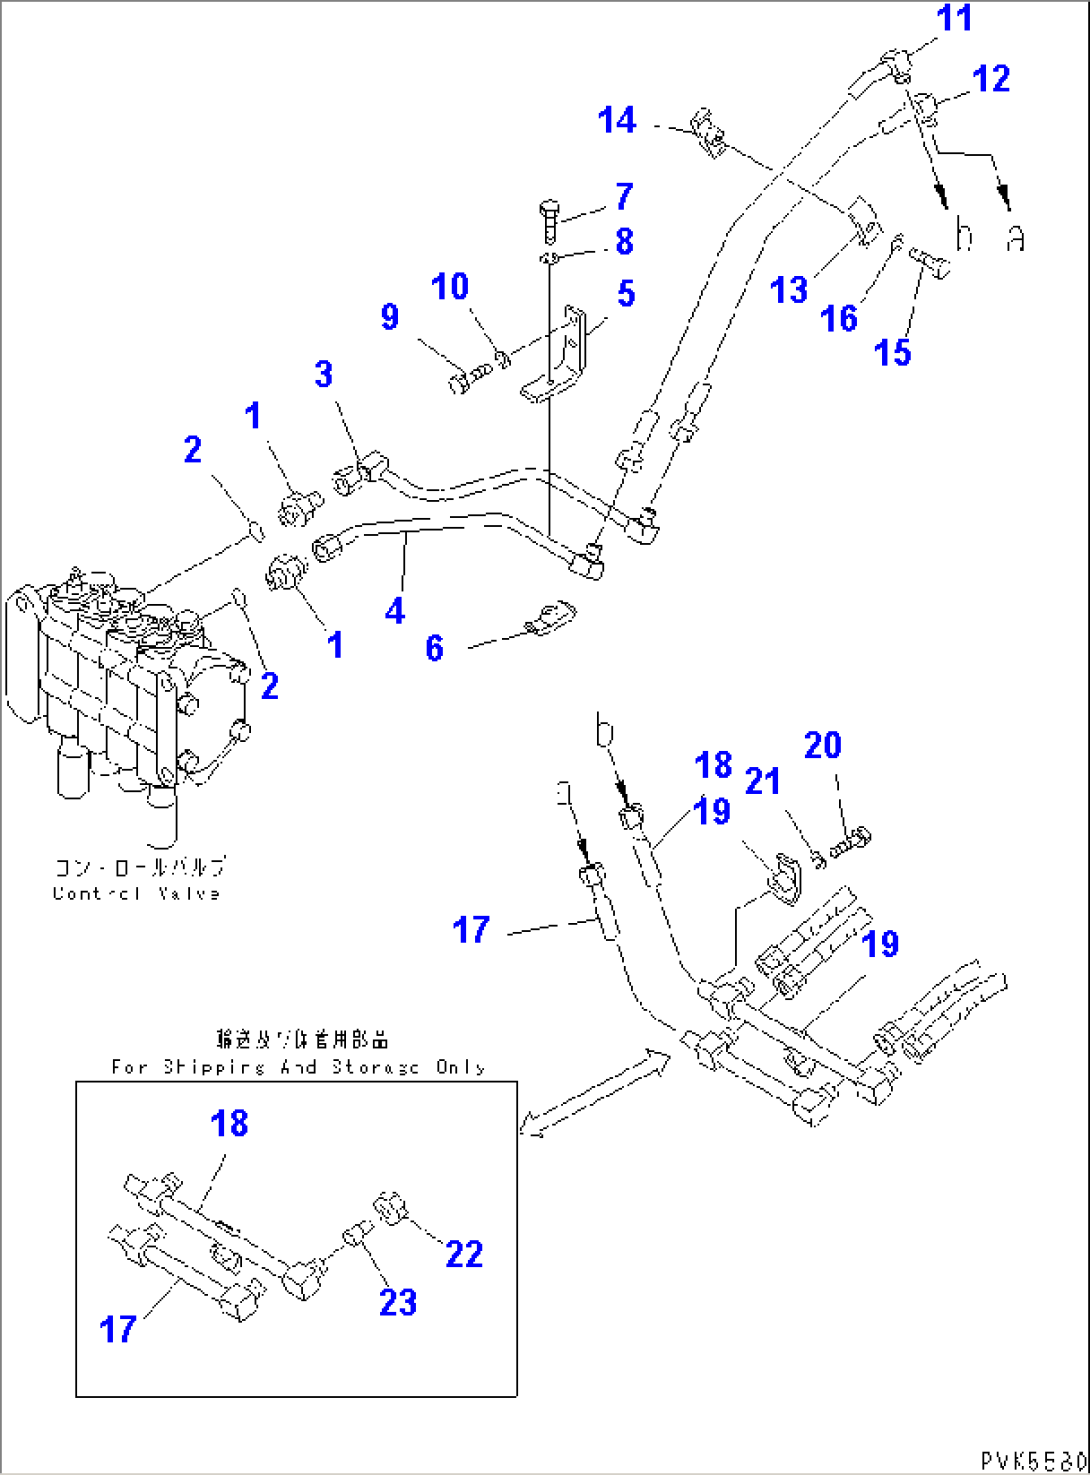 HYDRAULIC PIPING (VALVE TO CYLINDER) (FOR 3-POINT HITCH)(#80199-)